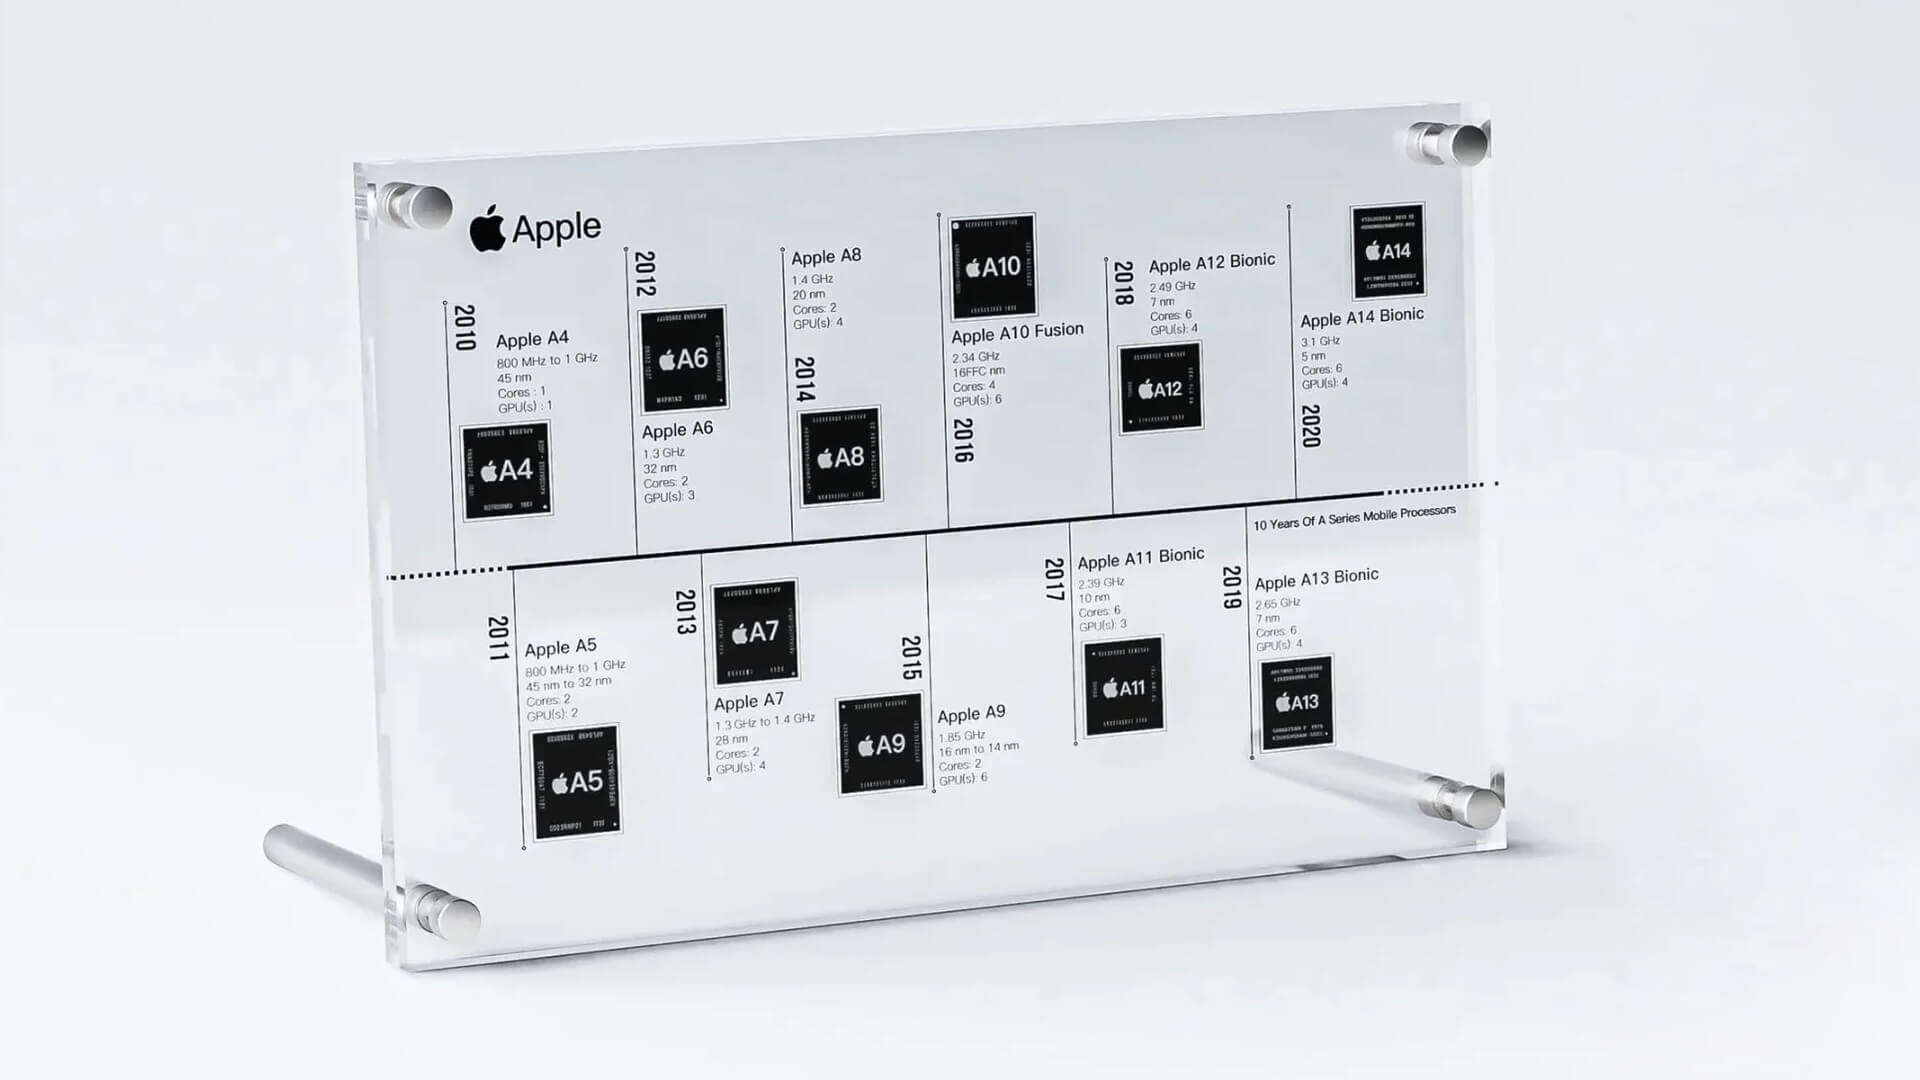 Apple A Series Mobile Processors